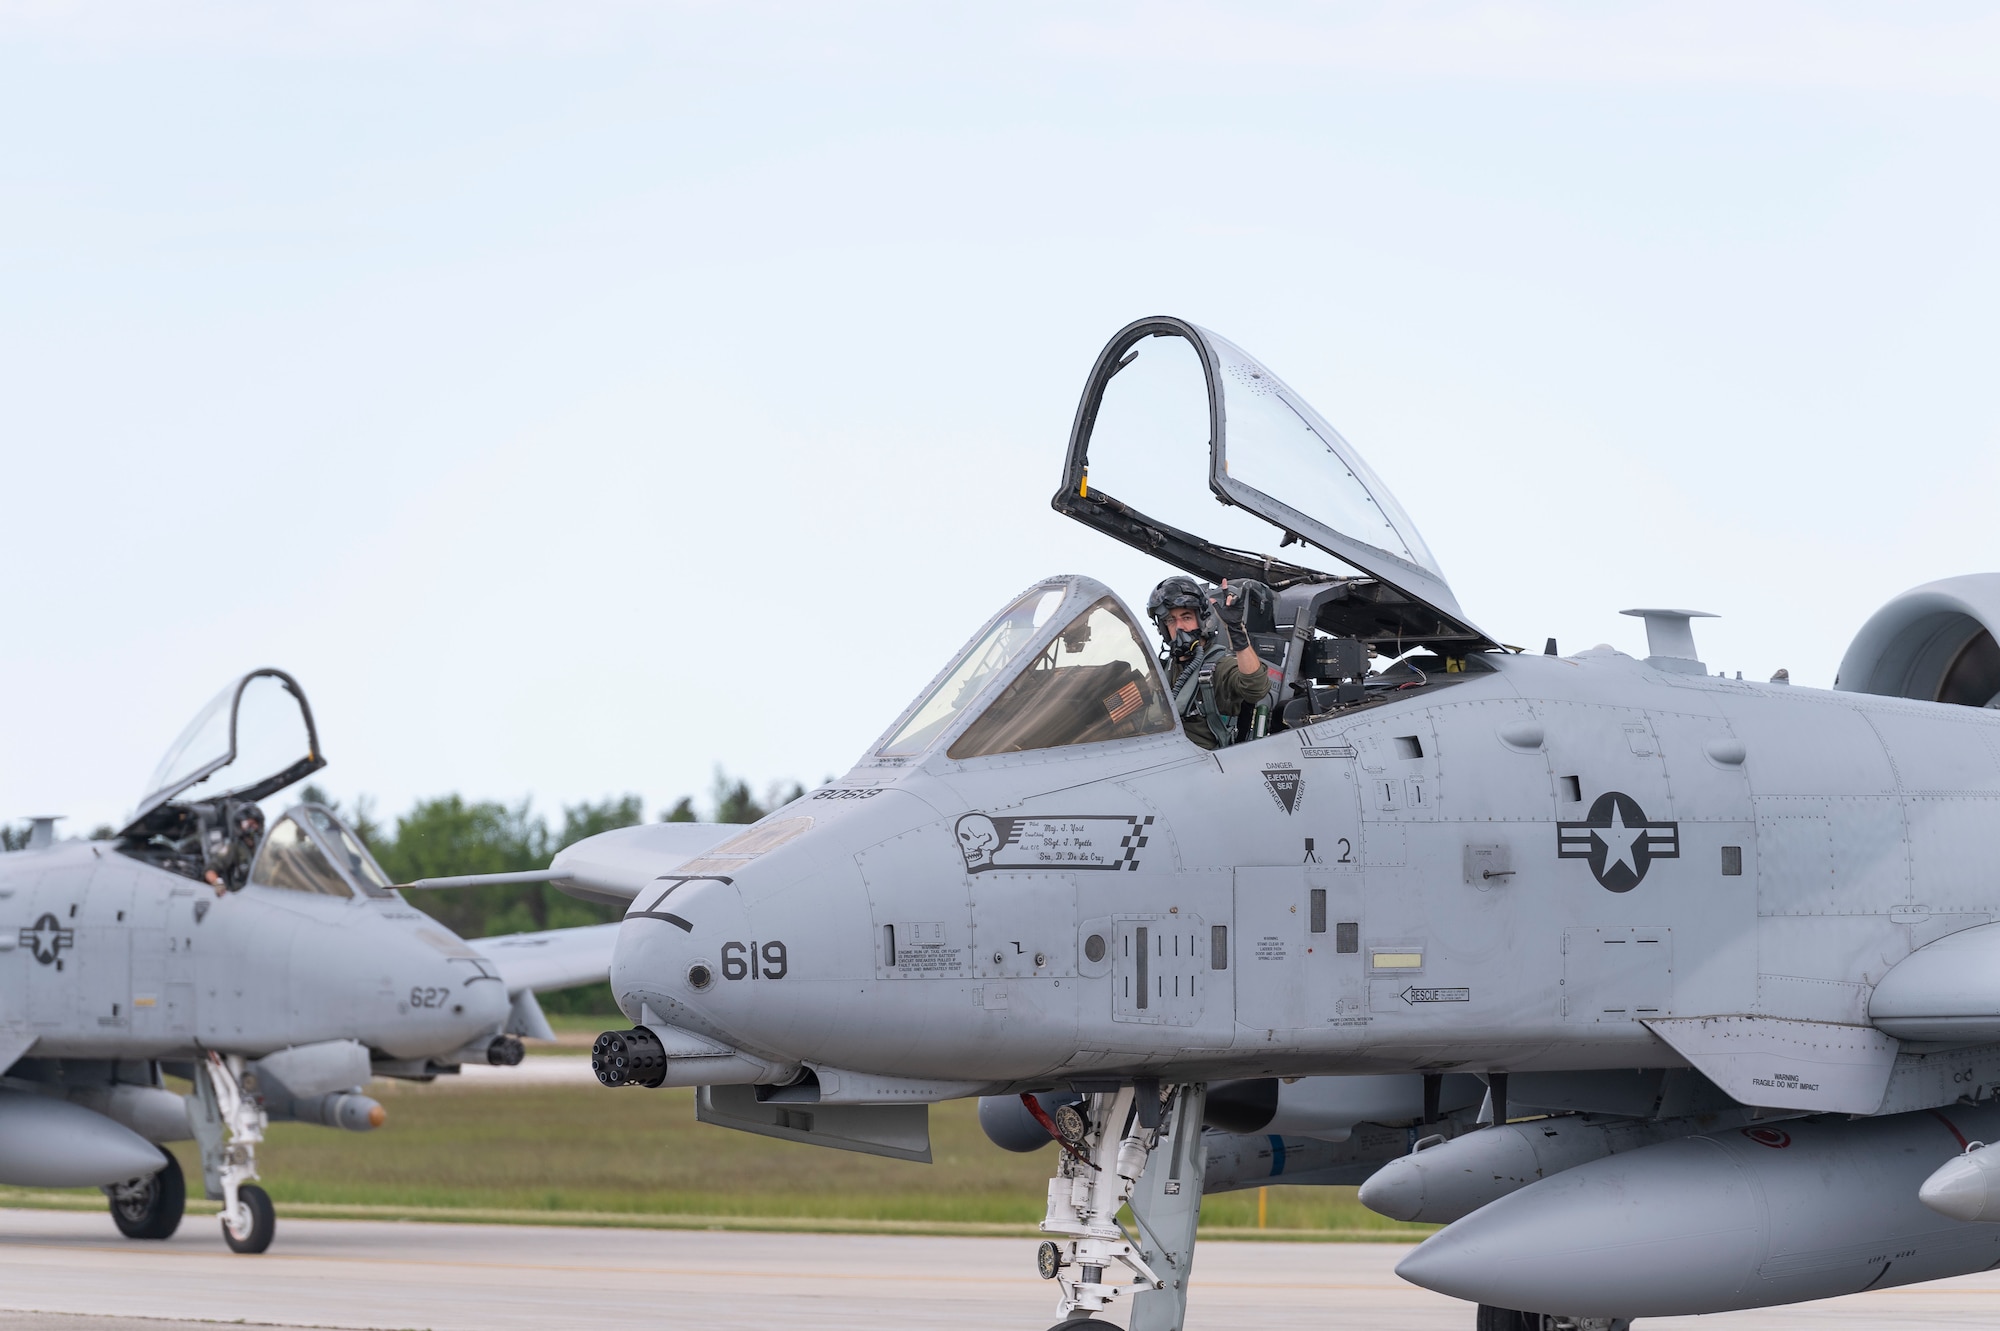 Two A-10 Thunderbolt IIs taxiing with their cockpits open